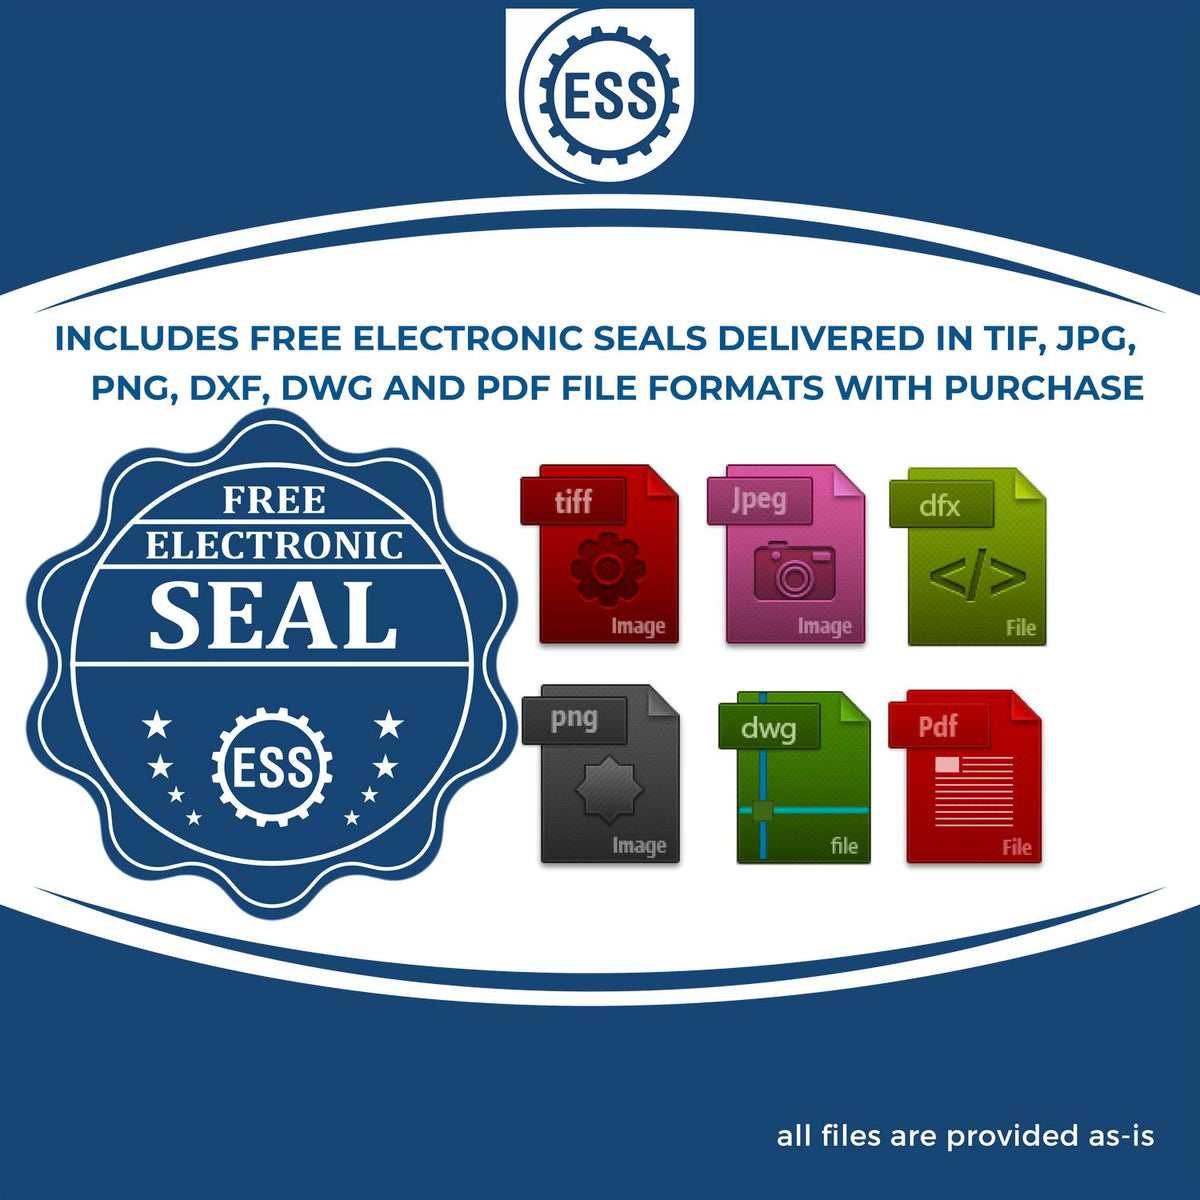 An infographic for the free electronic seal for the Long Reach South Carolina Geology Seal illustrating the different file type icons such as DXF, DWG, TIF, JPG and PNG.